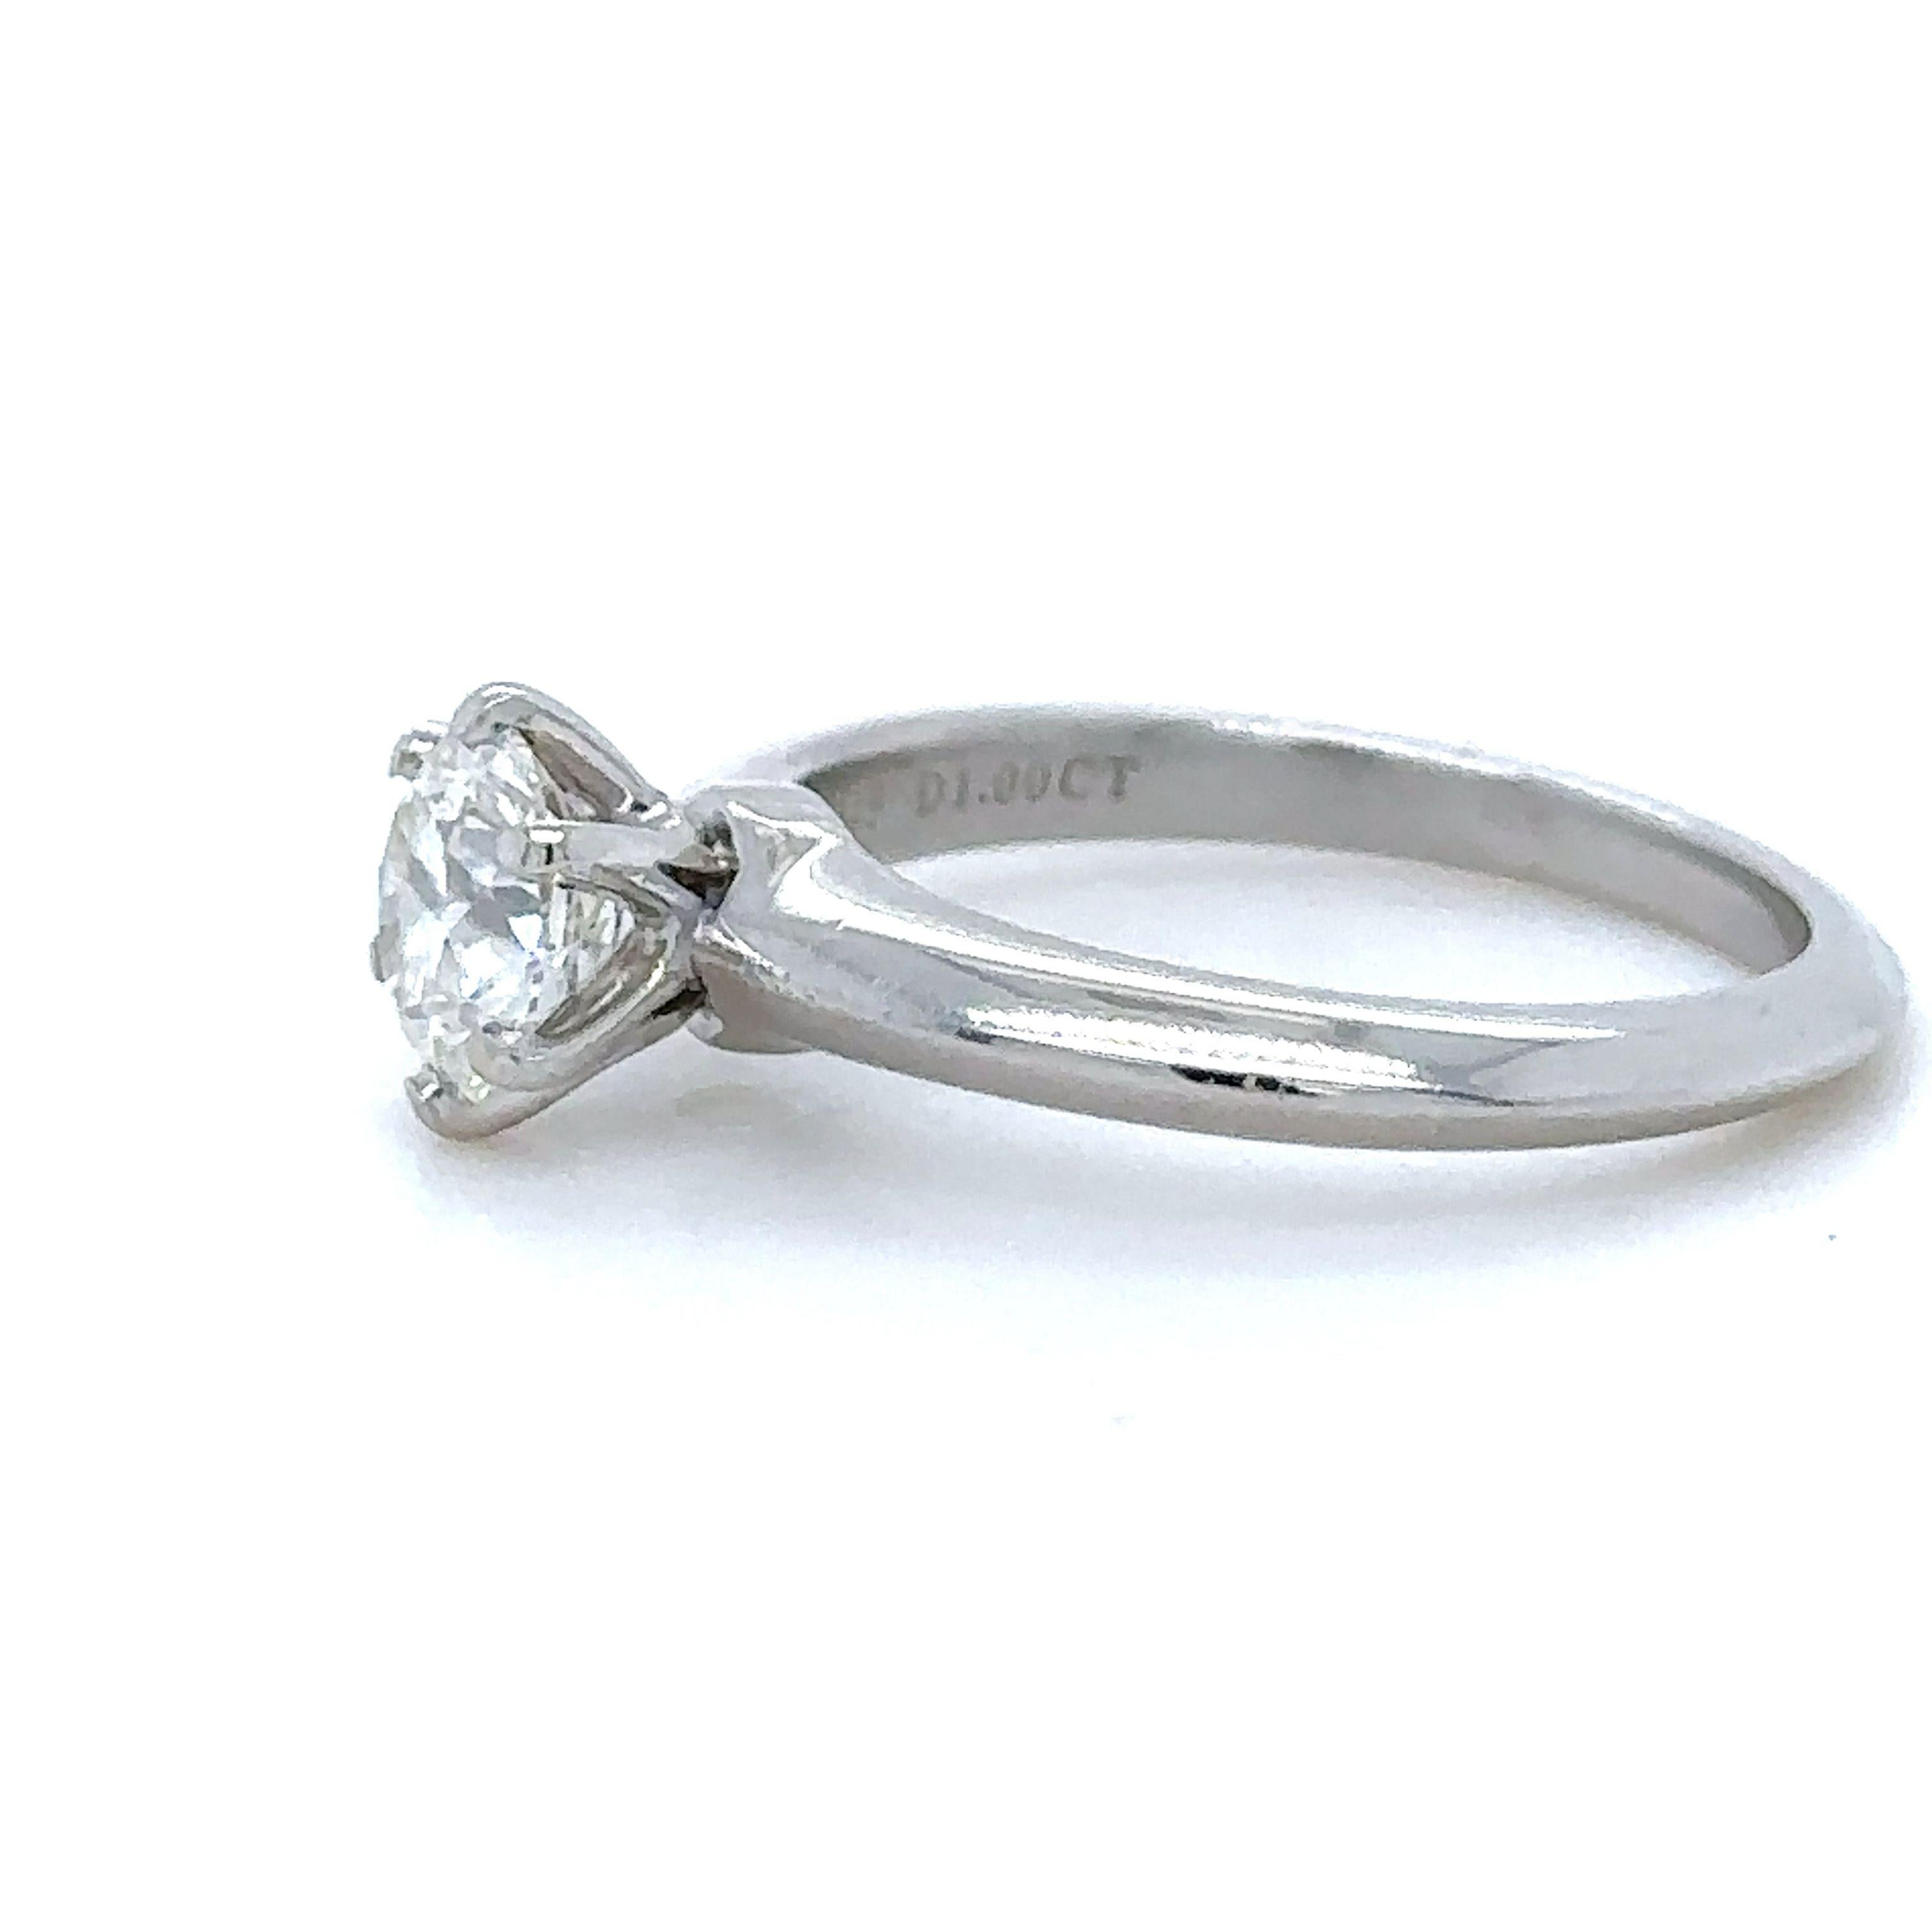 A Tiffany & Co, Diamond Engagement Ring, made of 950 Platinum, and weighing 5.84 gm. Stamped: Tiffany & Co. PT950 30297245.

Set with a Round, brilliant cut Diamond, colour I, and clarity VS2. Weighing 1.00 ct. laser inscribed: T&Co. N08010008.